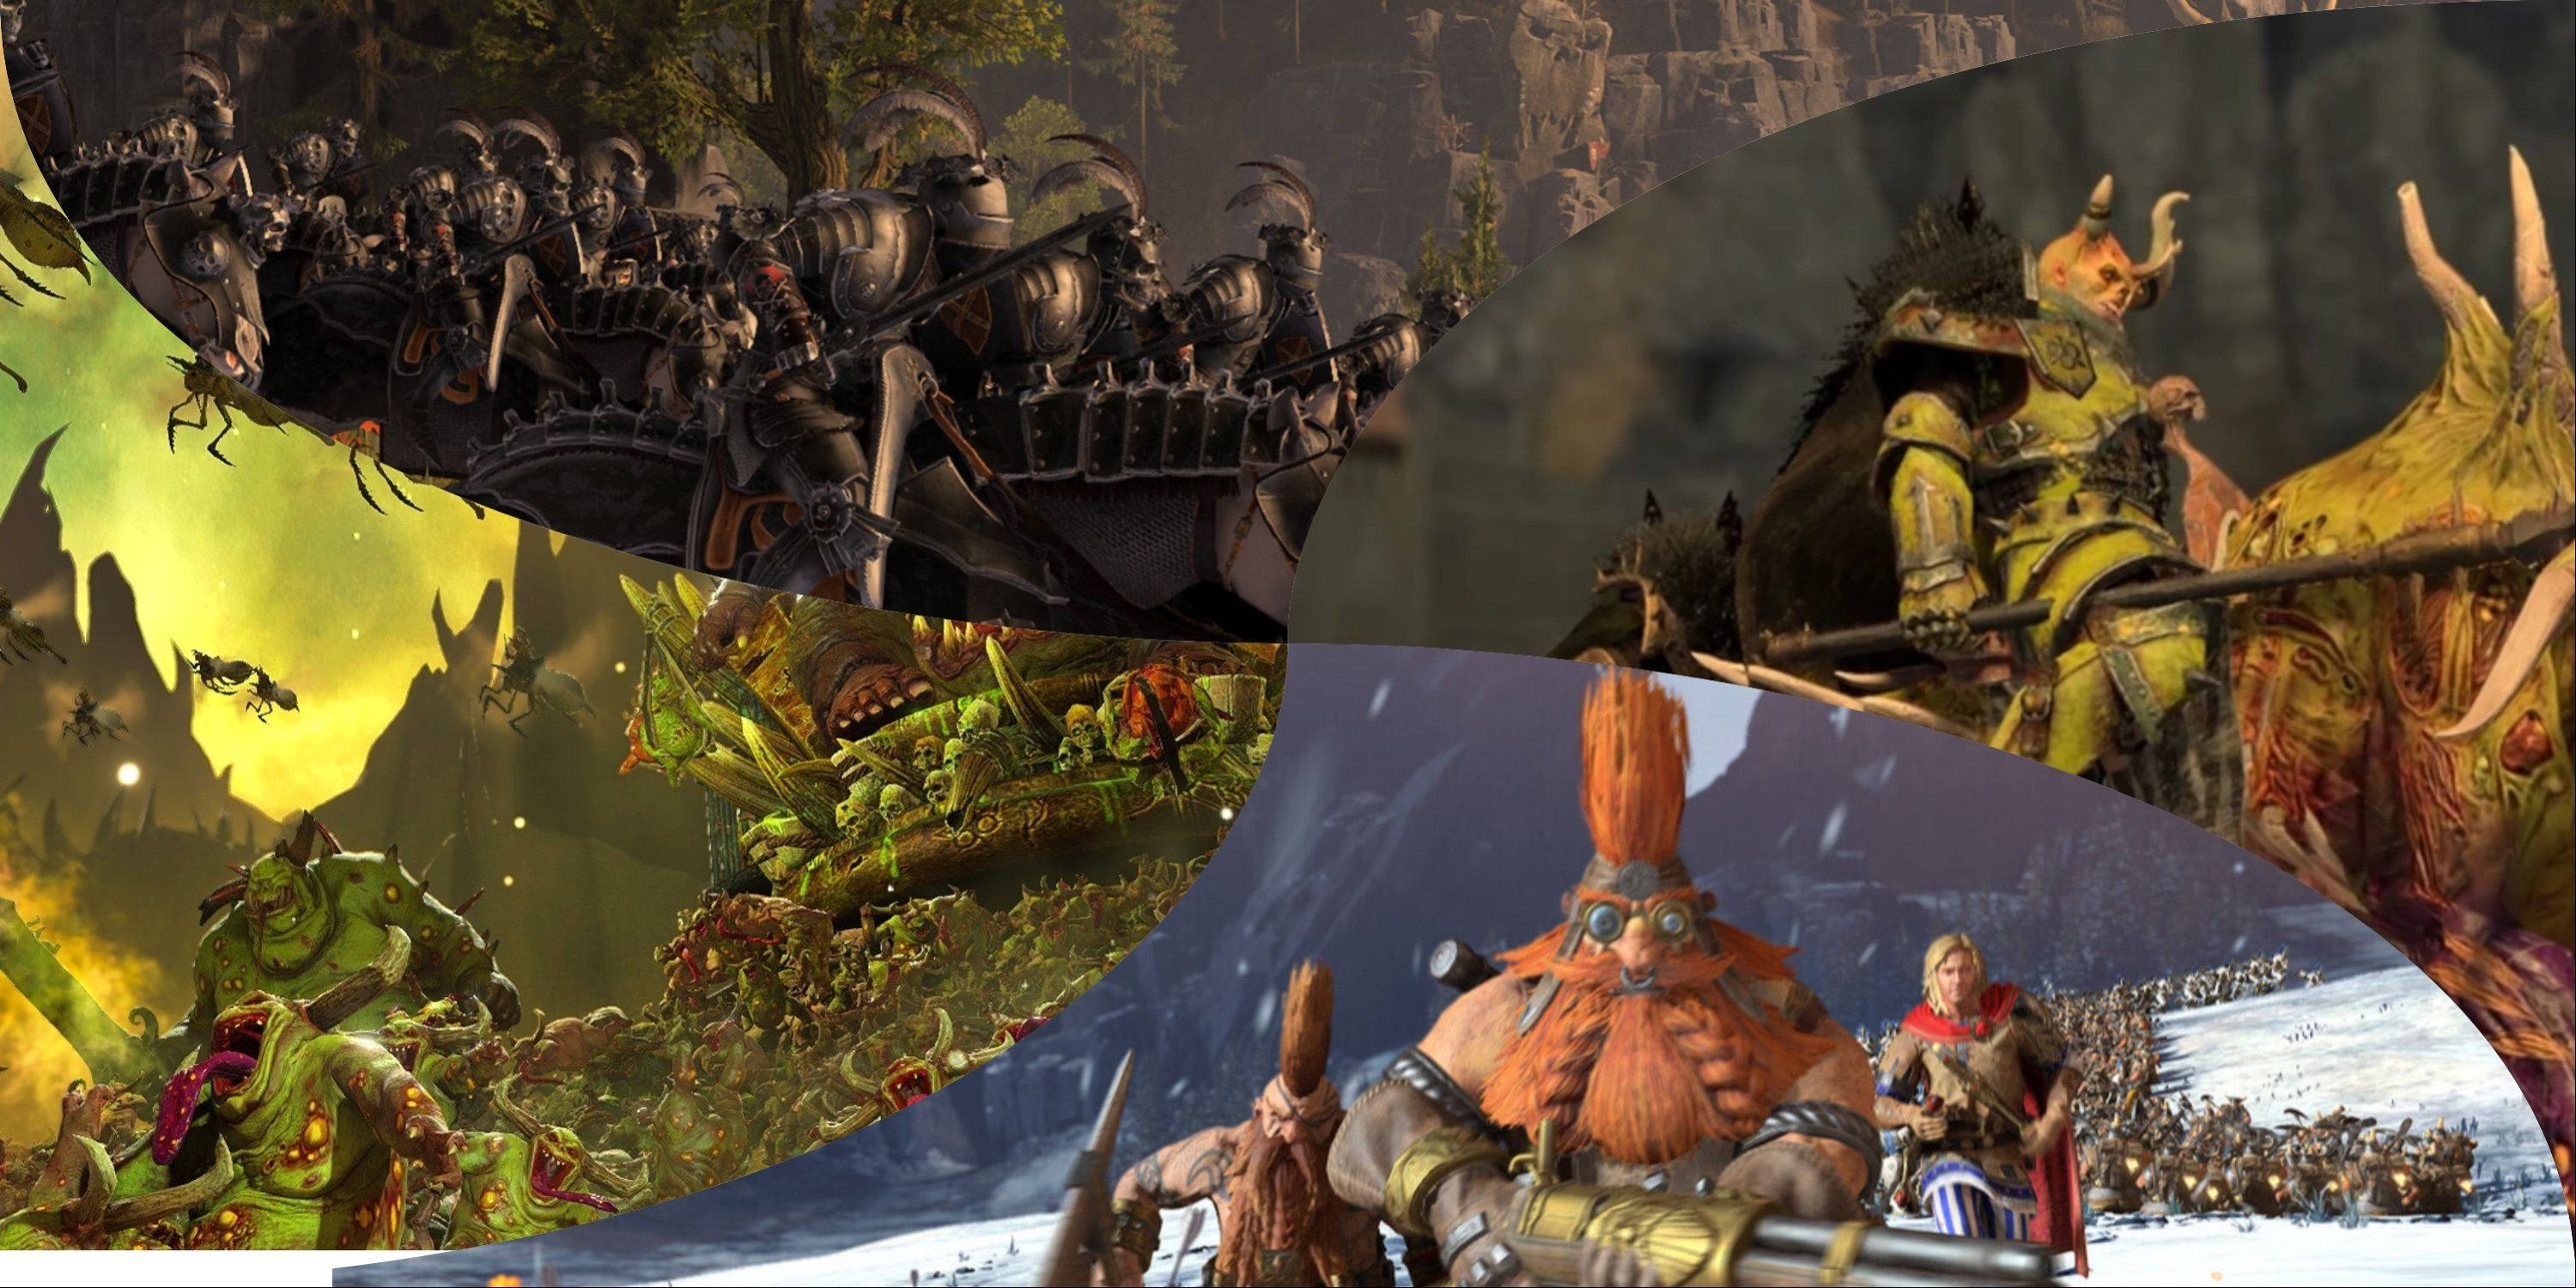 Total War: Warhammer 3: Thrones Of Decay DLC, All New Units Ranked - knights of the black rose, rot knight, malakai mikaelson and a nurgle army